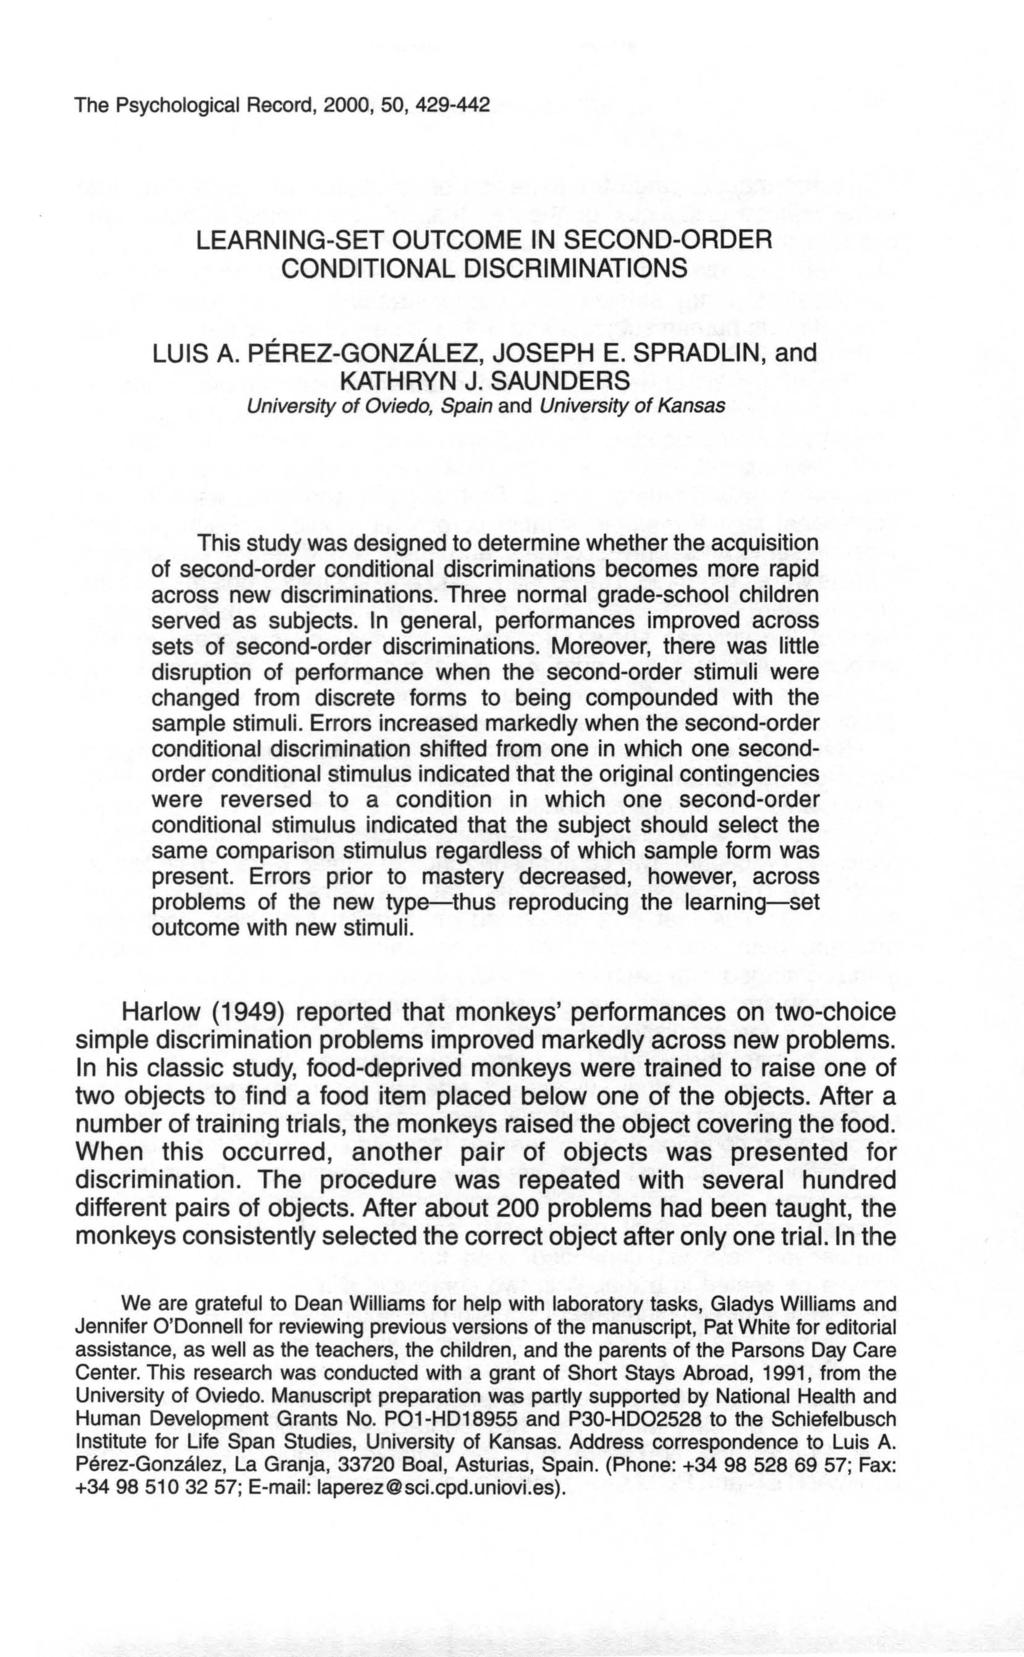 The Psychological Record, 2000, 50, 429-442 LEARNING-SET OUTCOME IN SECOND-ORDER CONDITIONAL DISCRIMINATIONS LUIS A. PEREZ-GONZALEZ, JOSEPH E. SPRADLIN, and KATHRYN J.